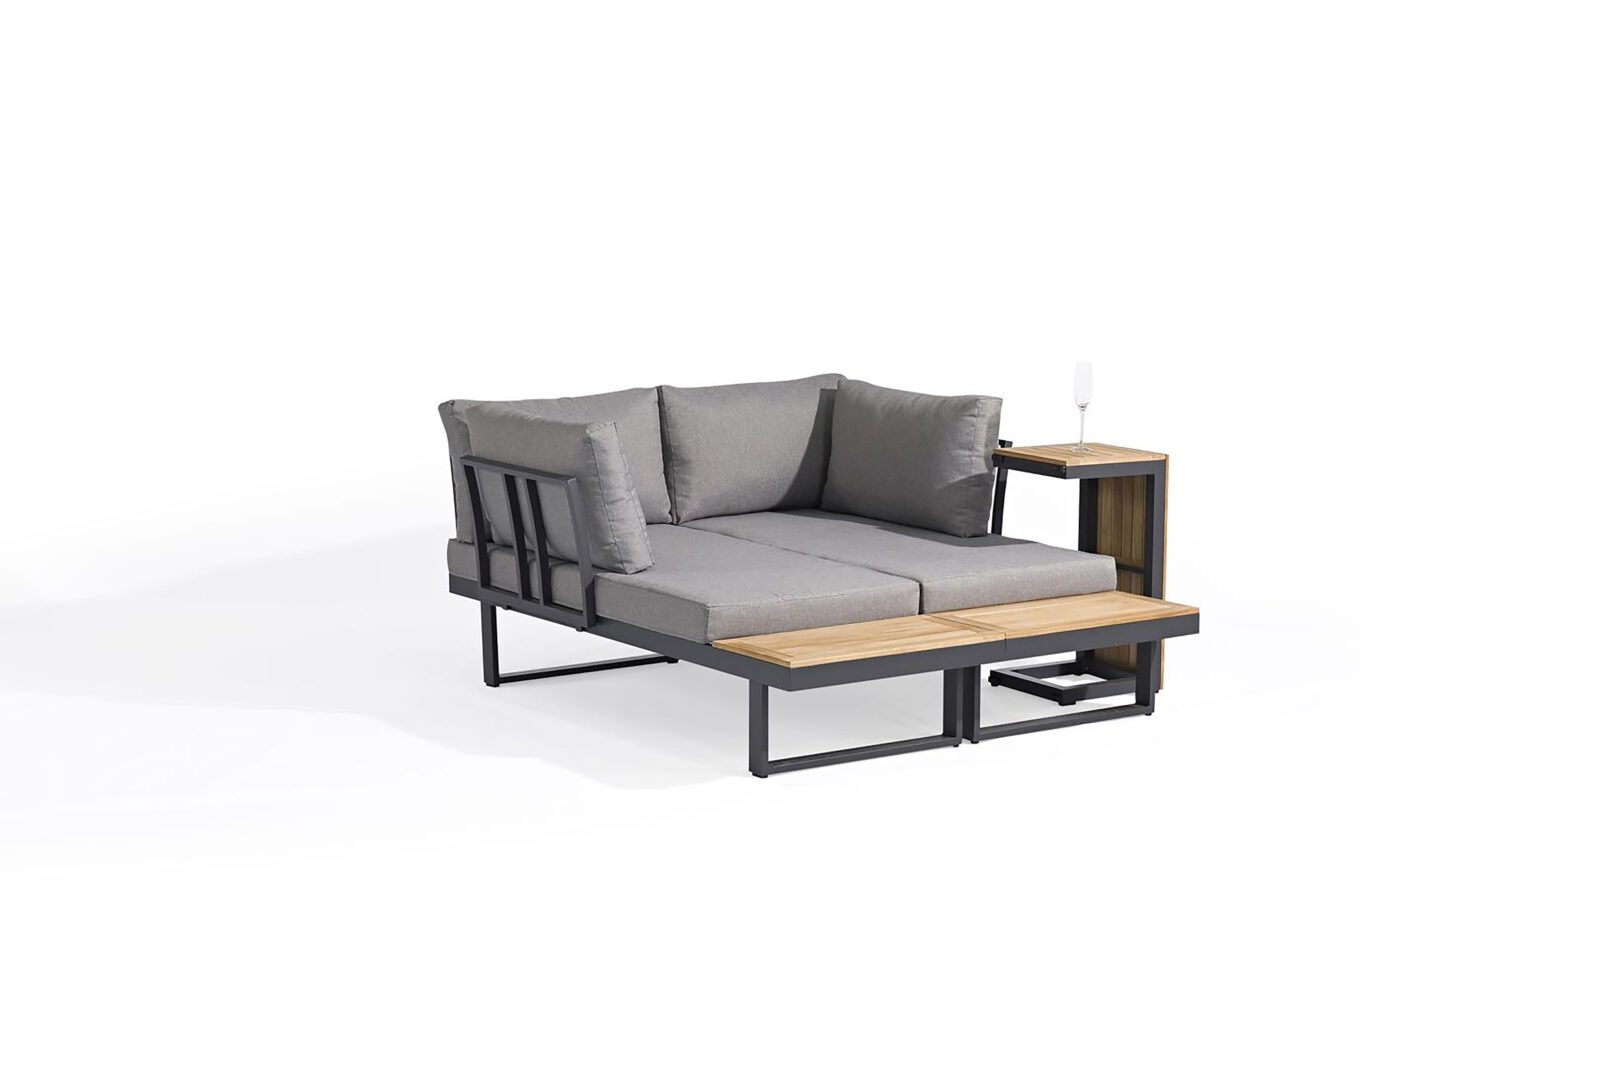 Loungeset Olympia | Multifunctioneel | 4-persoons Olympia loungeset 35130 2 scaled